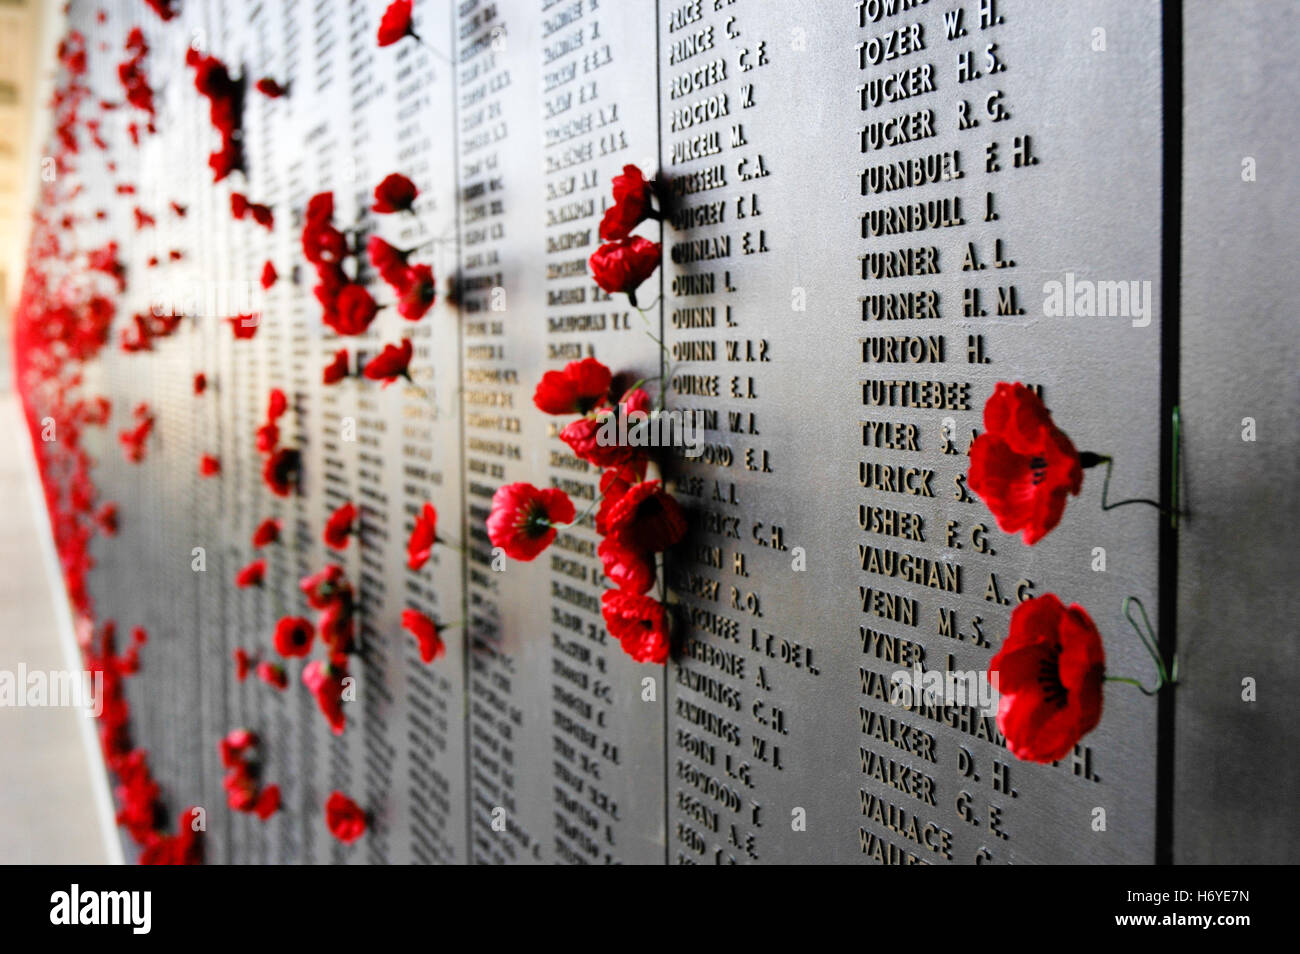 visitors leave red paper poppies in roll of honour wall for loved ones killed in action. australian war memorial. canberra. act Stock Photo